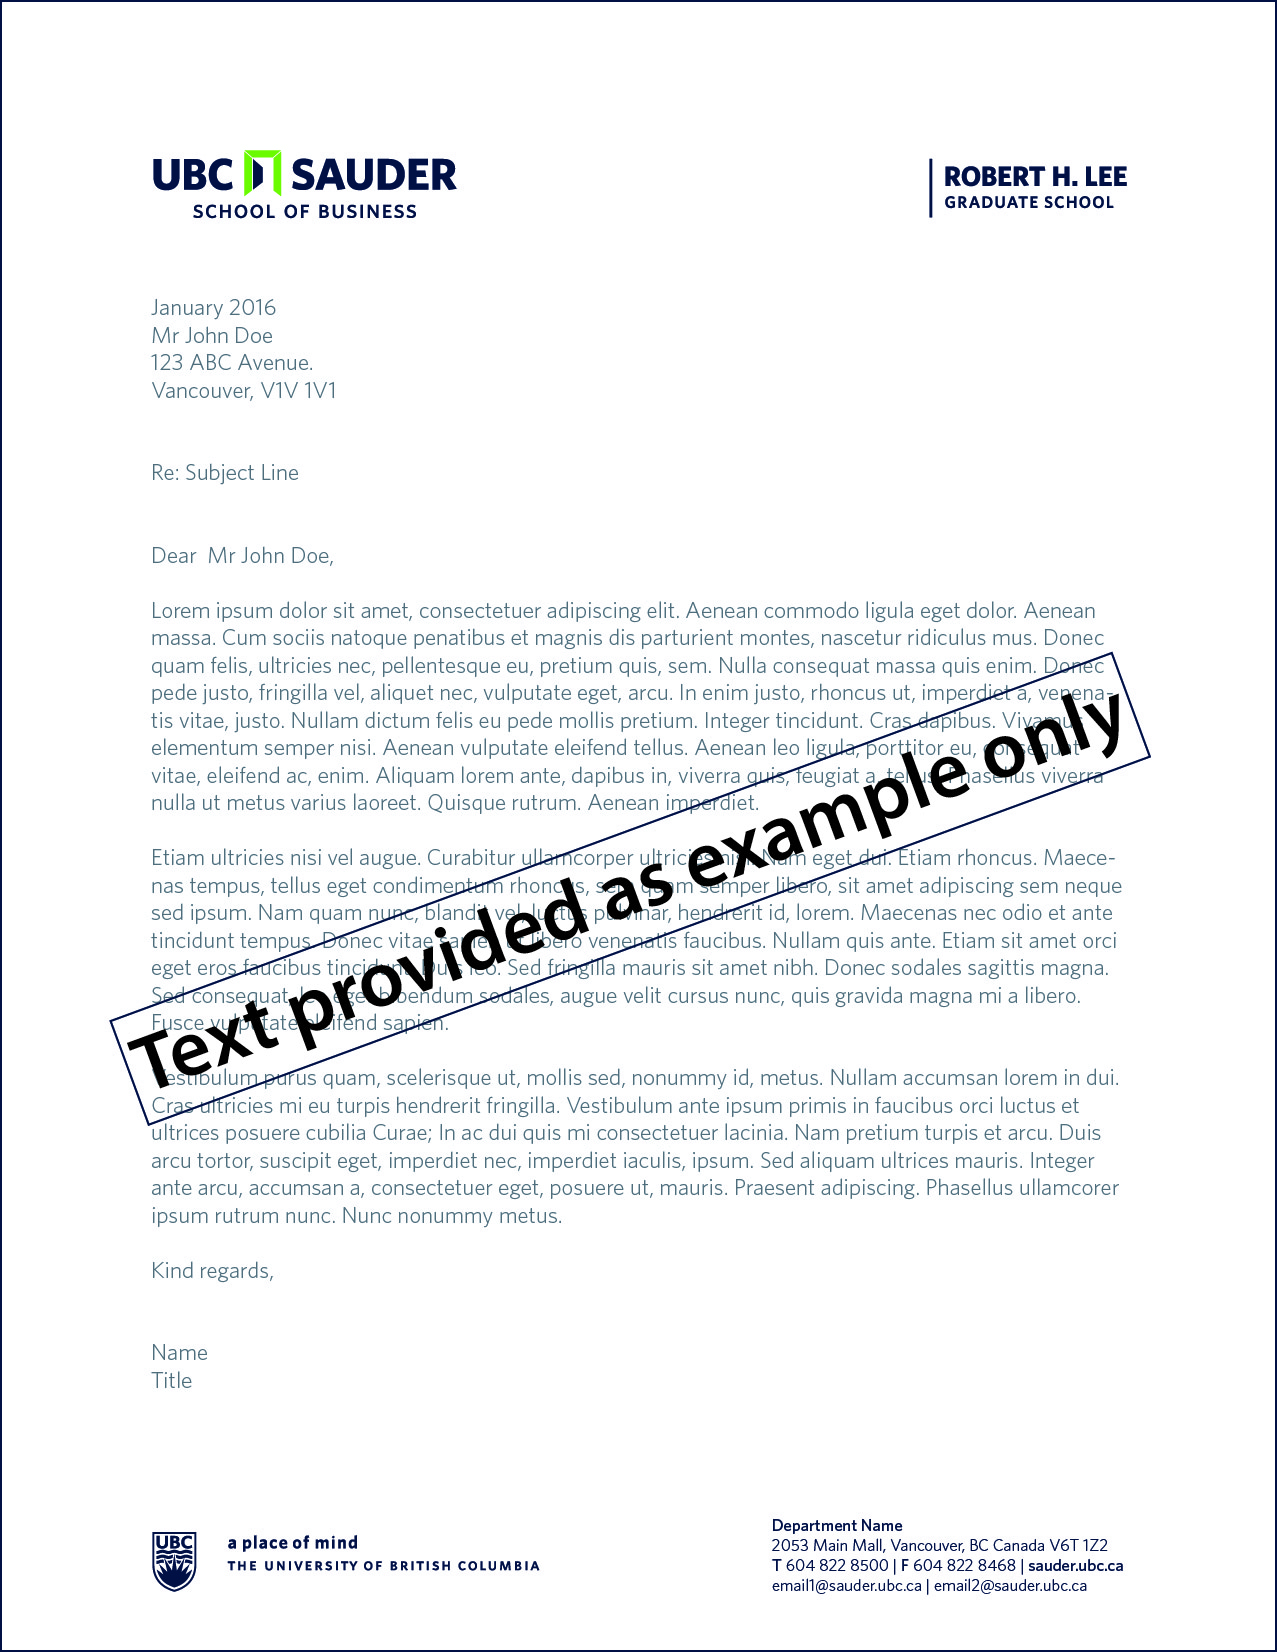 RHL letterhead example with text